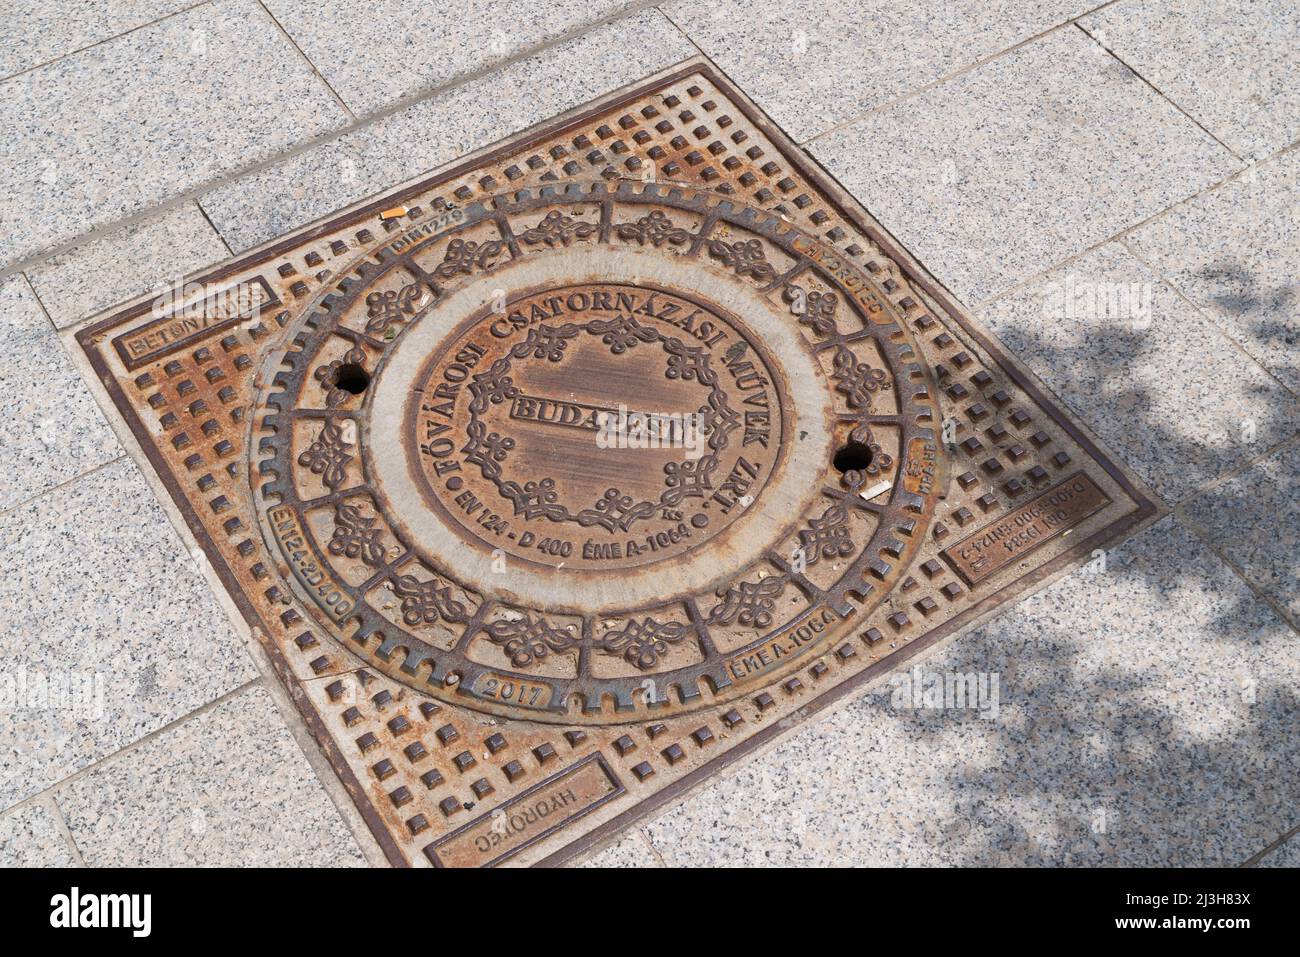 sewer lid in budapest, hungary Stock Photo